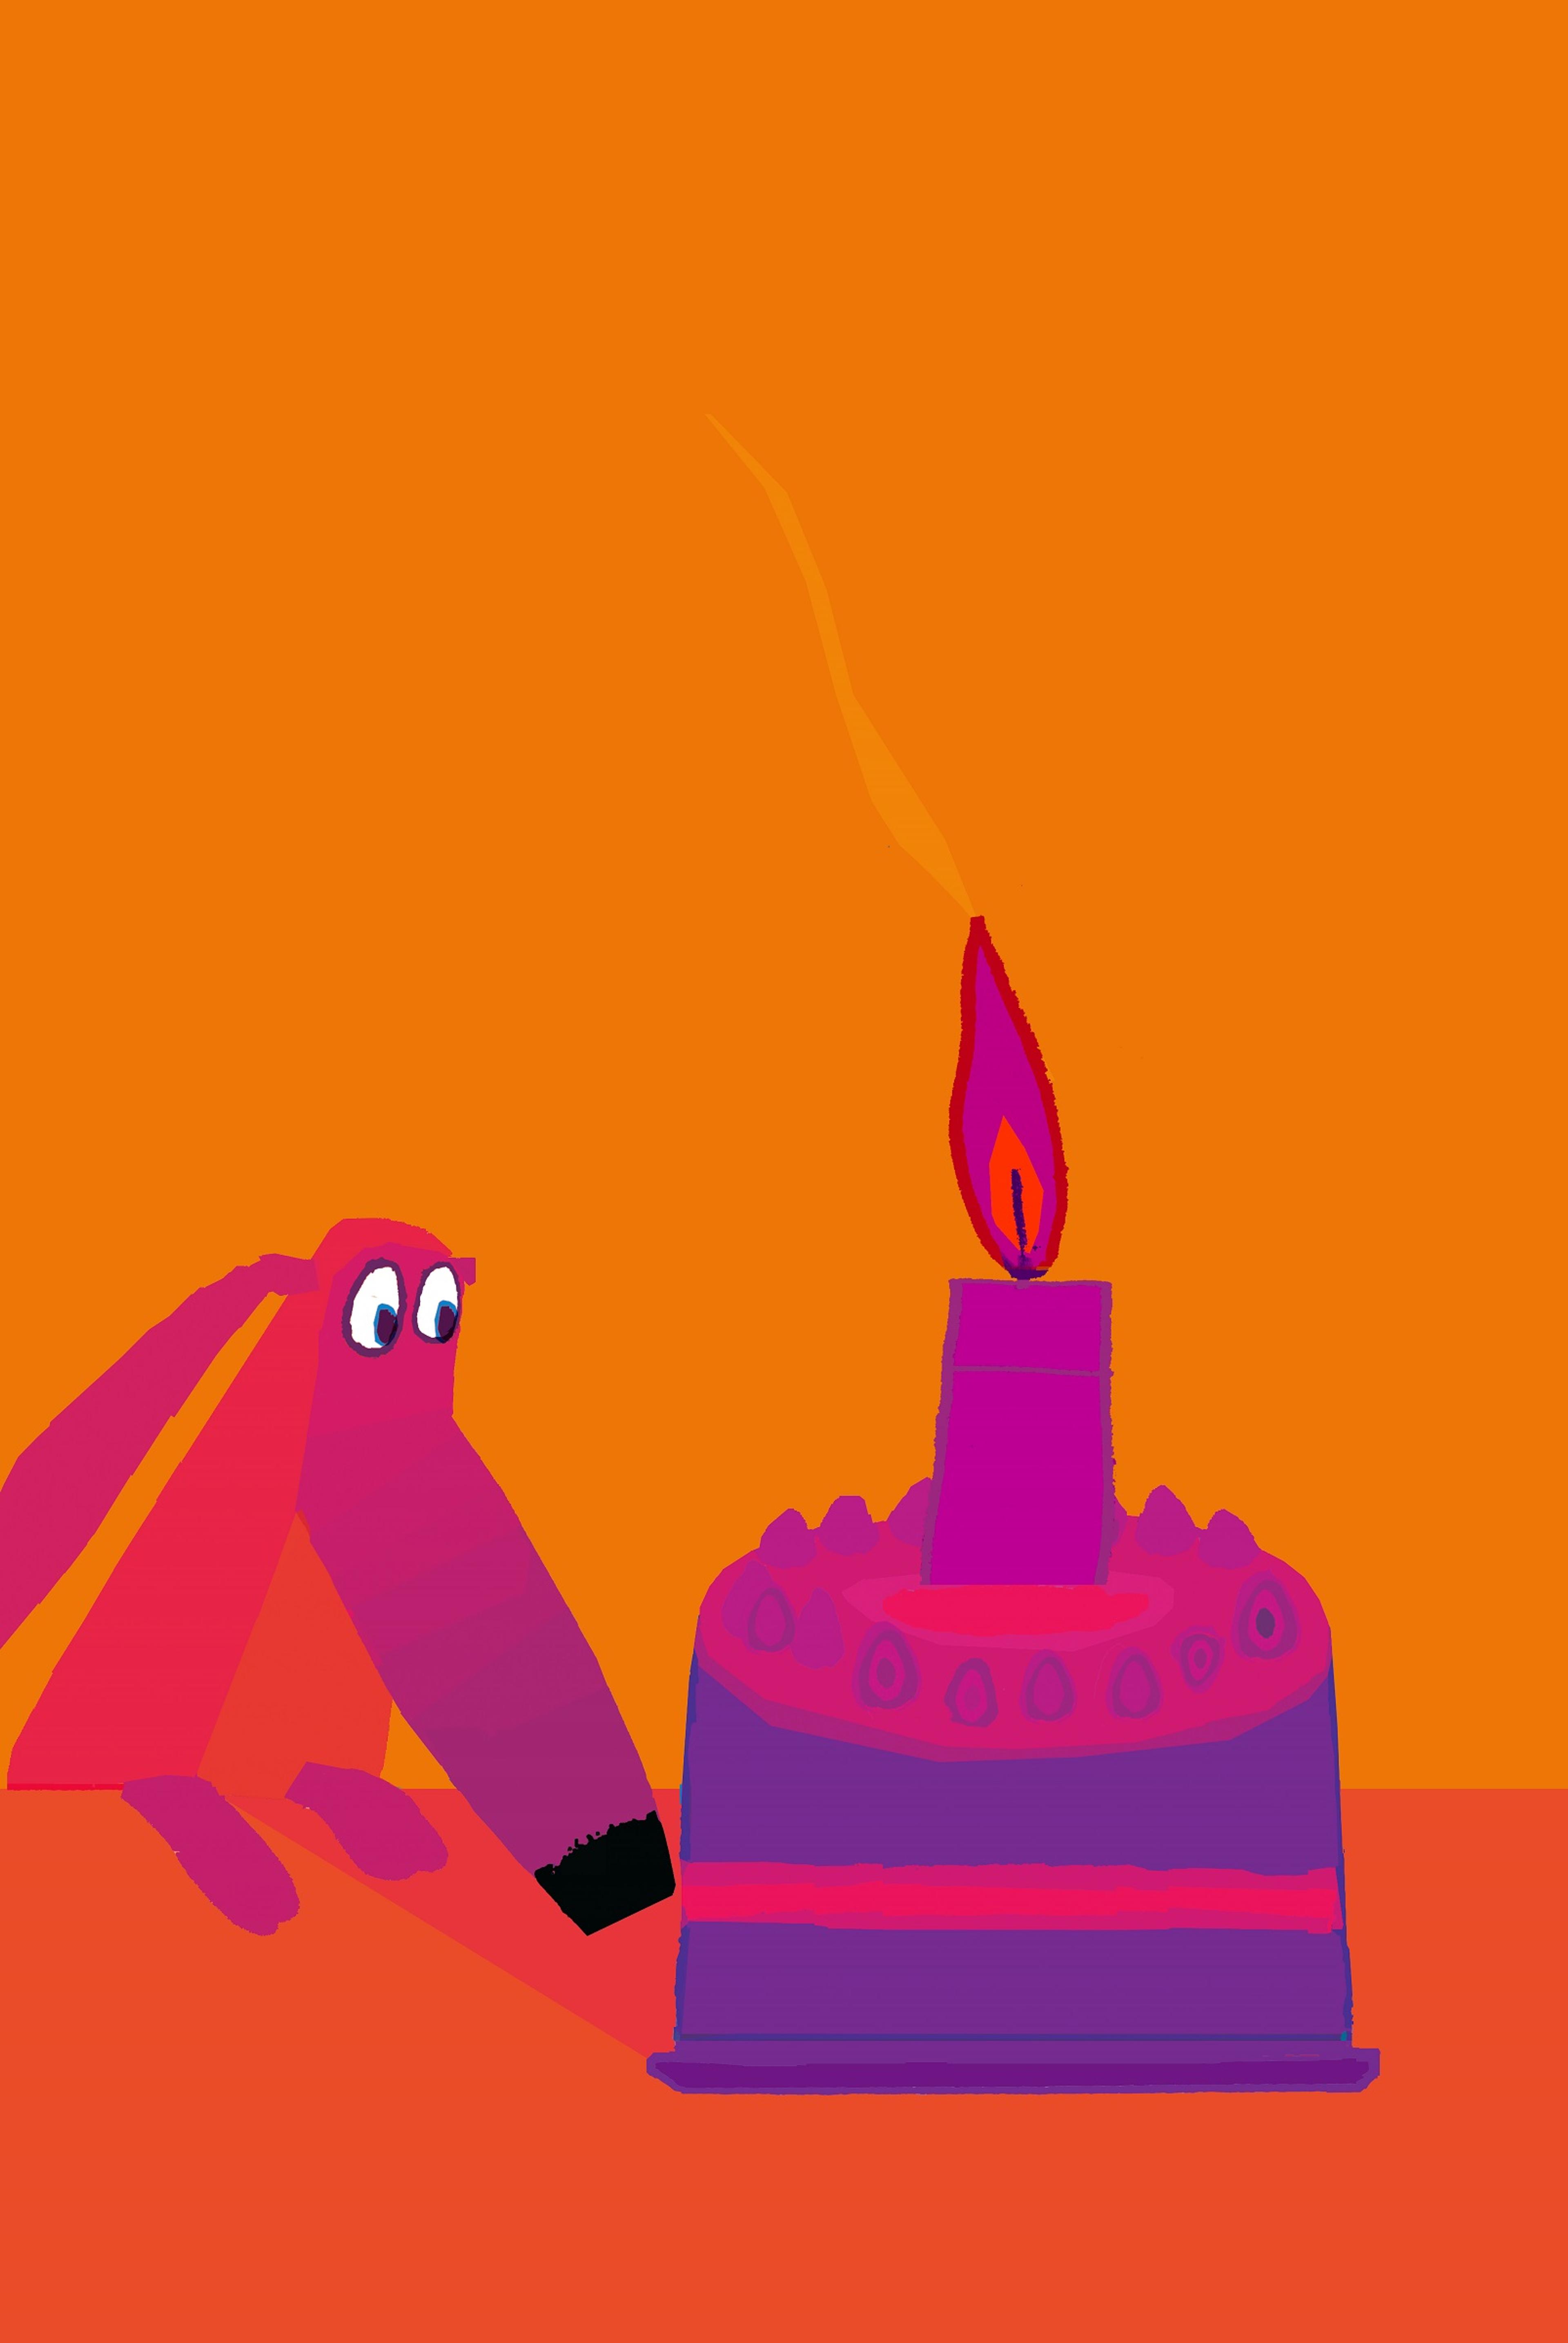 Illustration of a dog looking at a birthday cake